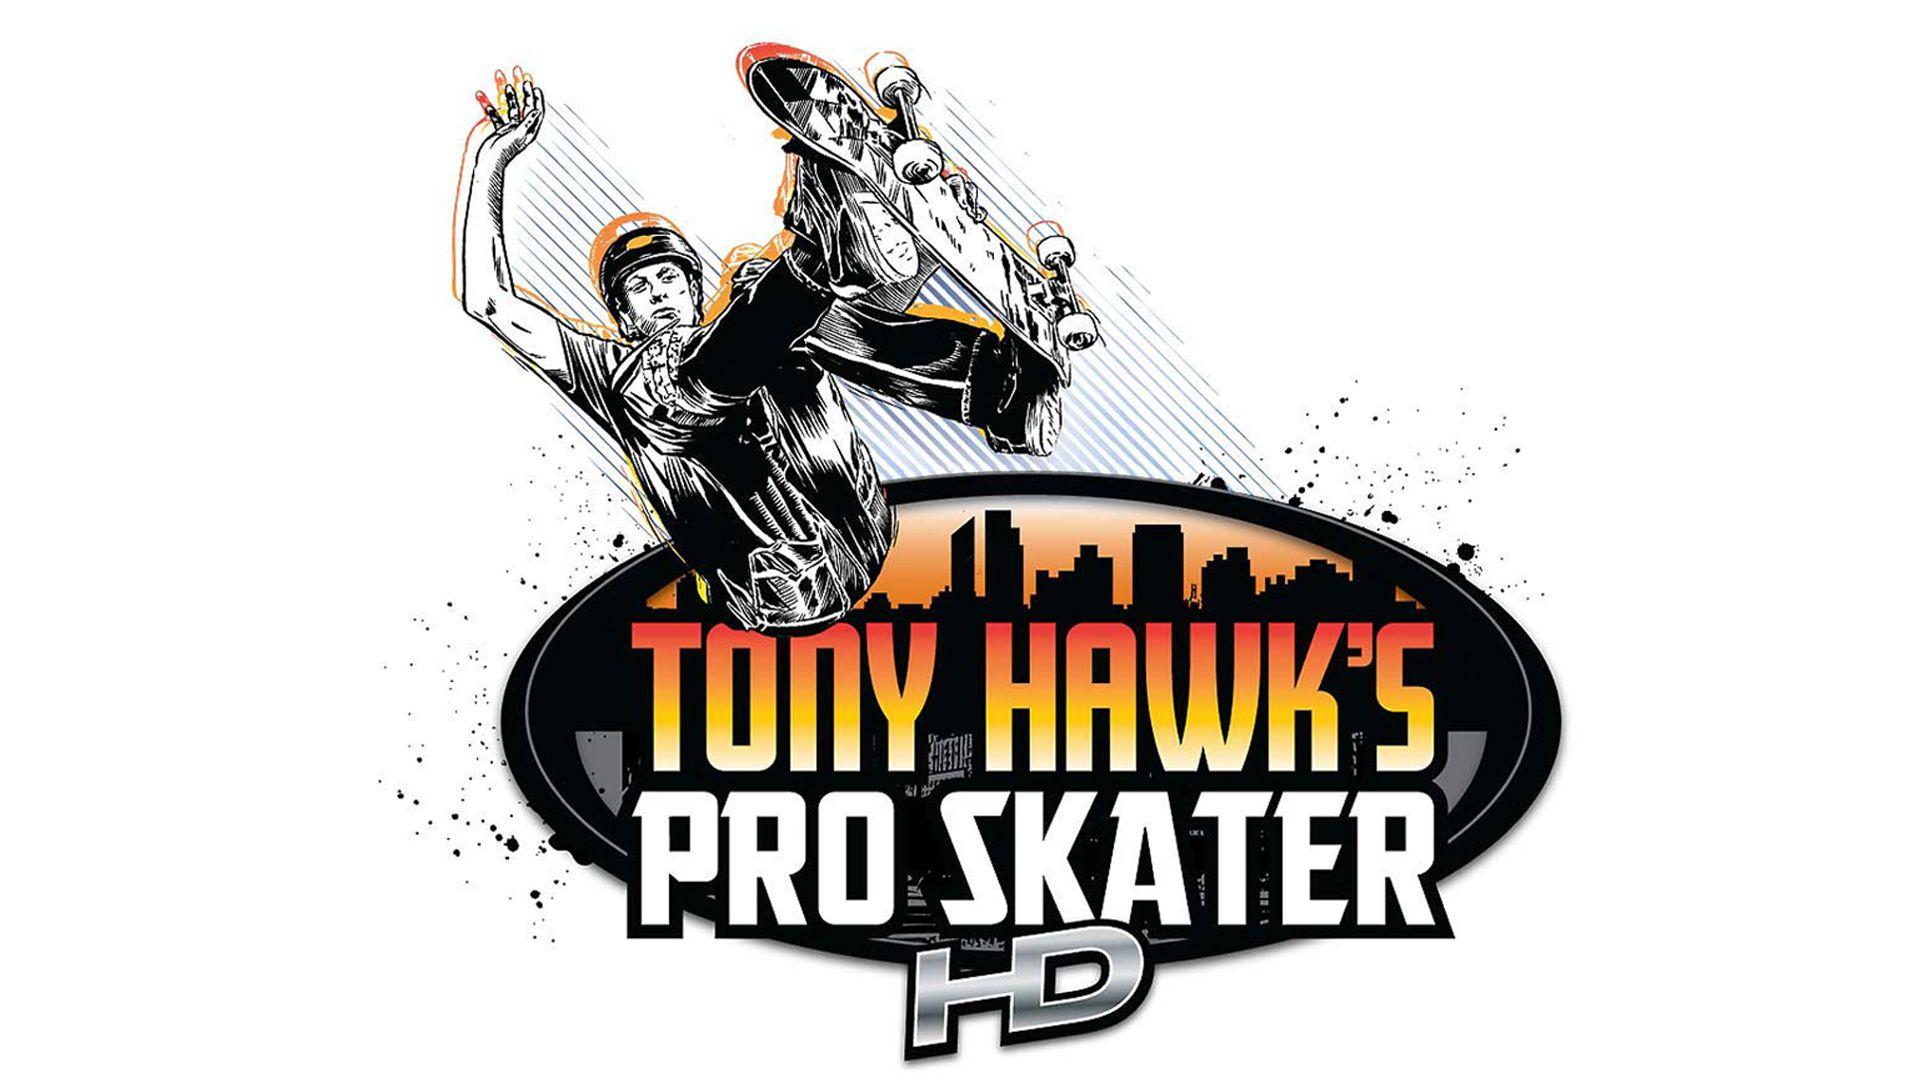 Tony Hawk's Pro Skater HD HD Wallpaper and Background Image